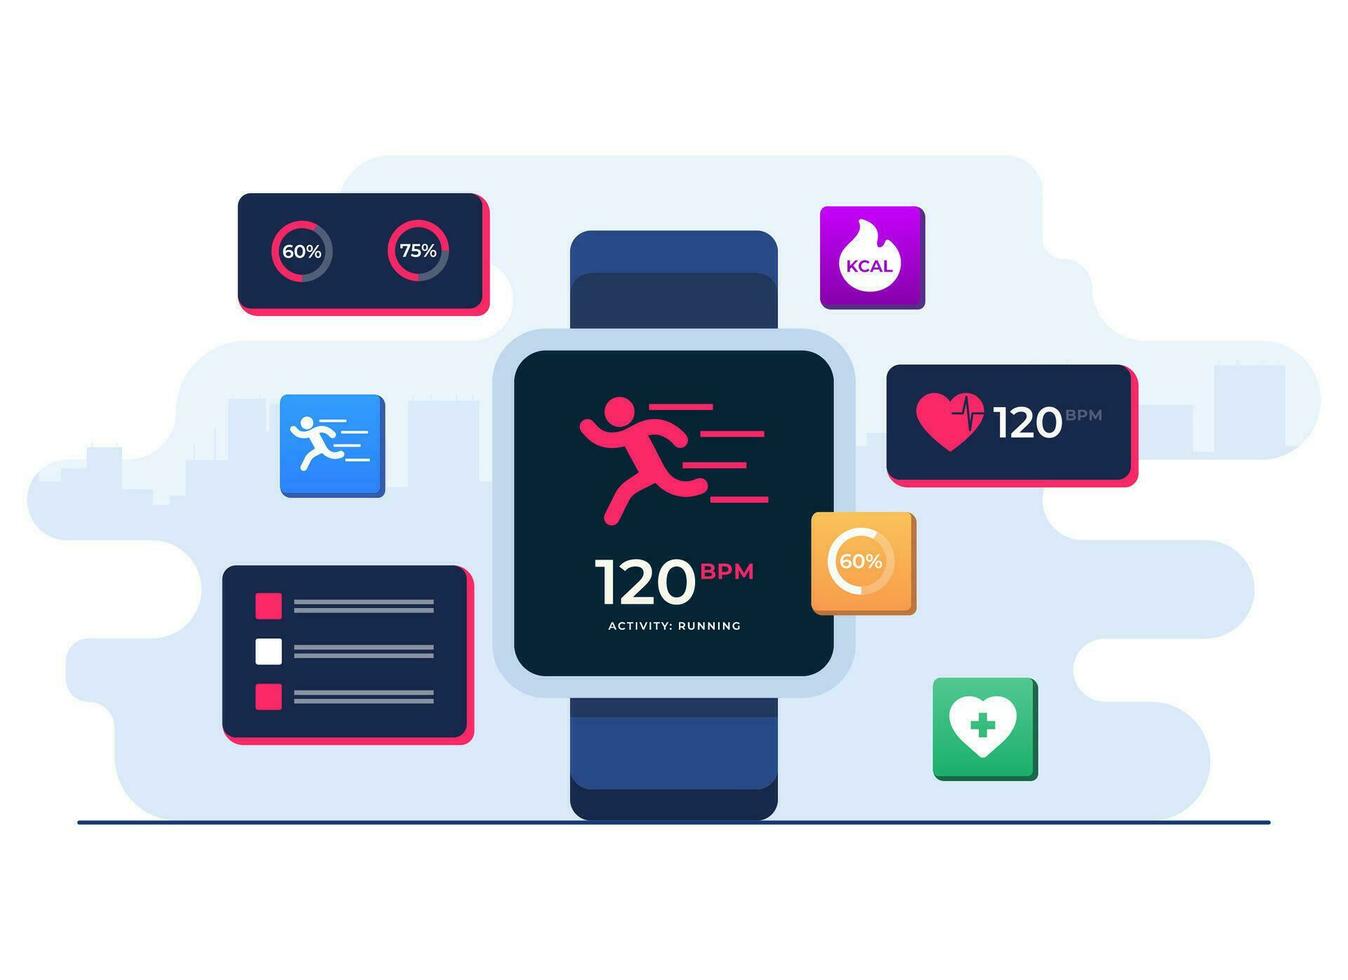 smartwatch healthcare concept flat illustration, Monitoring heart rate in smartwatch, Workout, Fitness and health concept, Fitness app, wrist-worn device vector